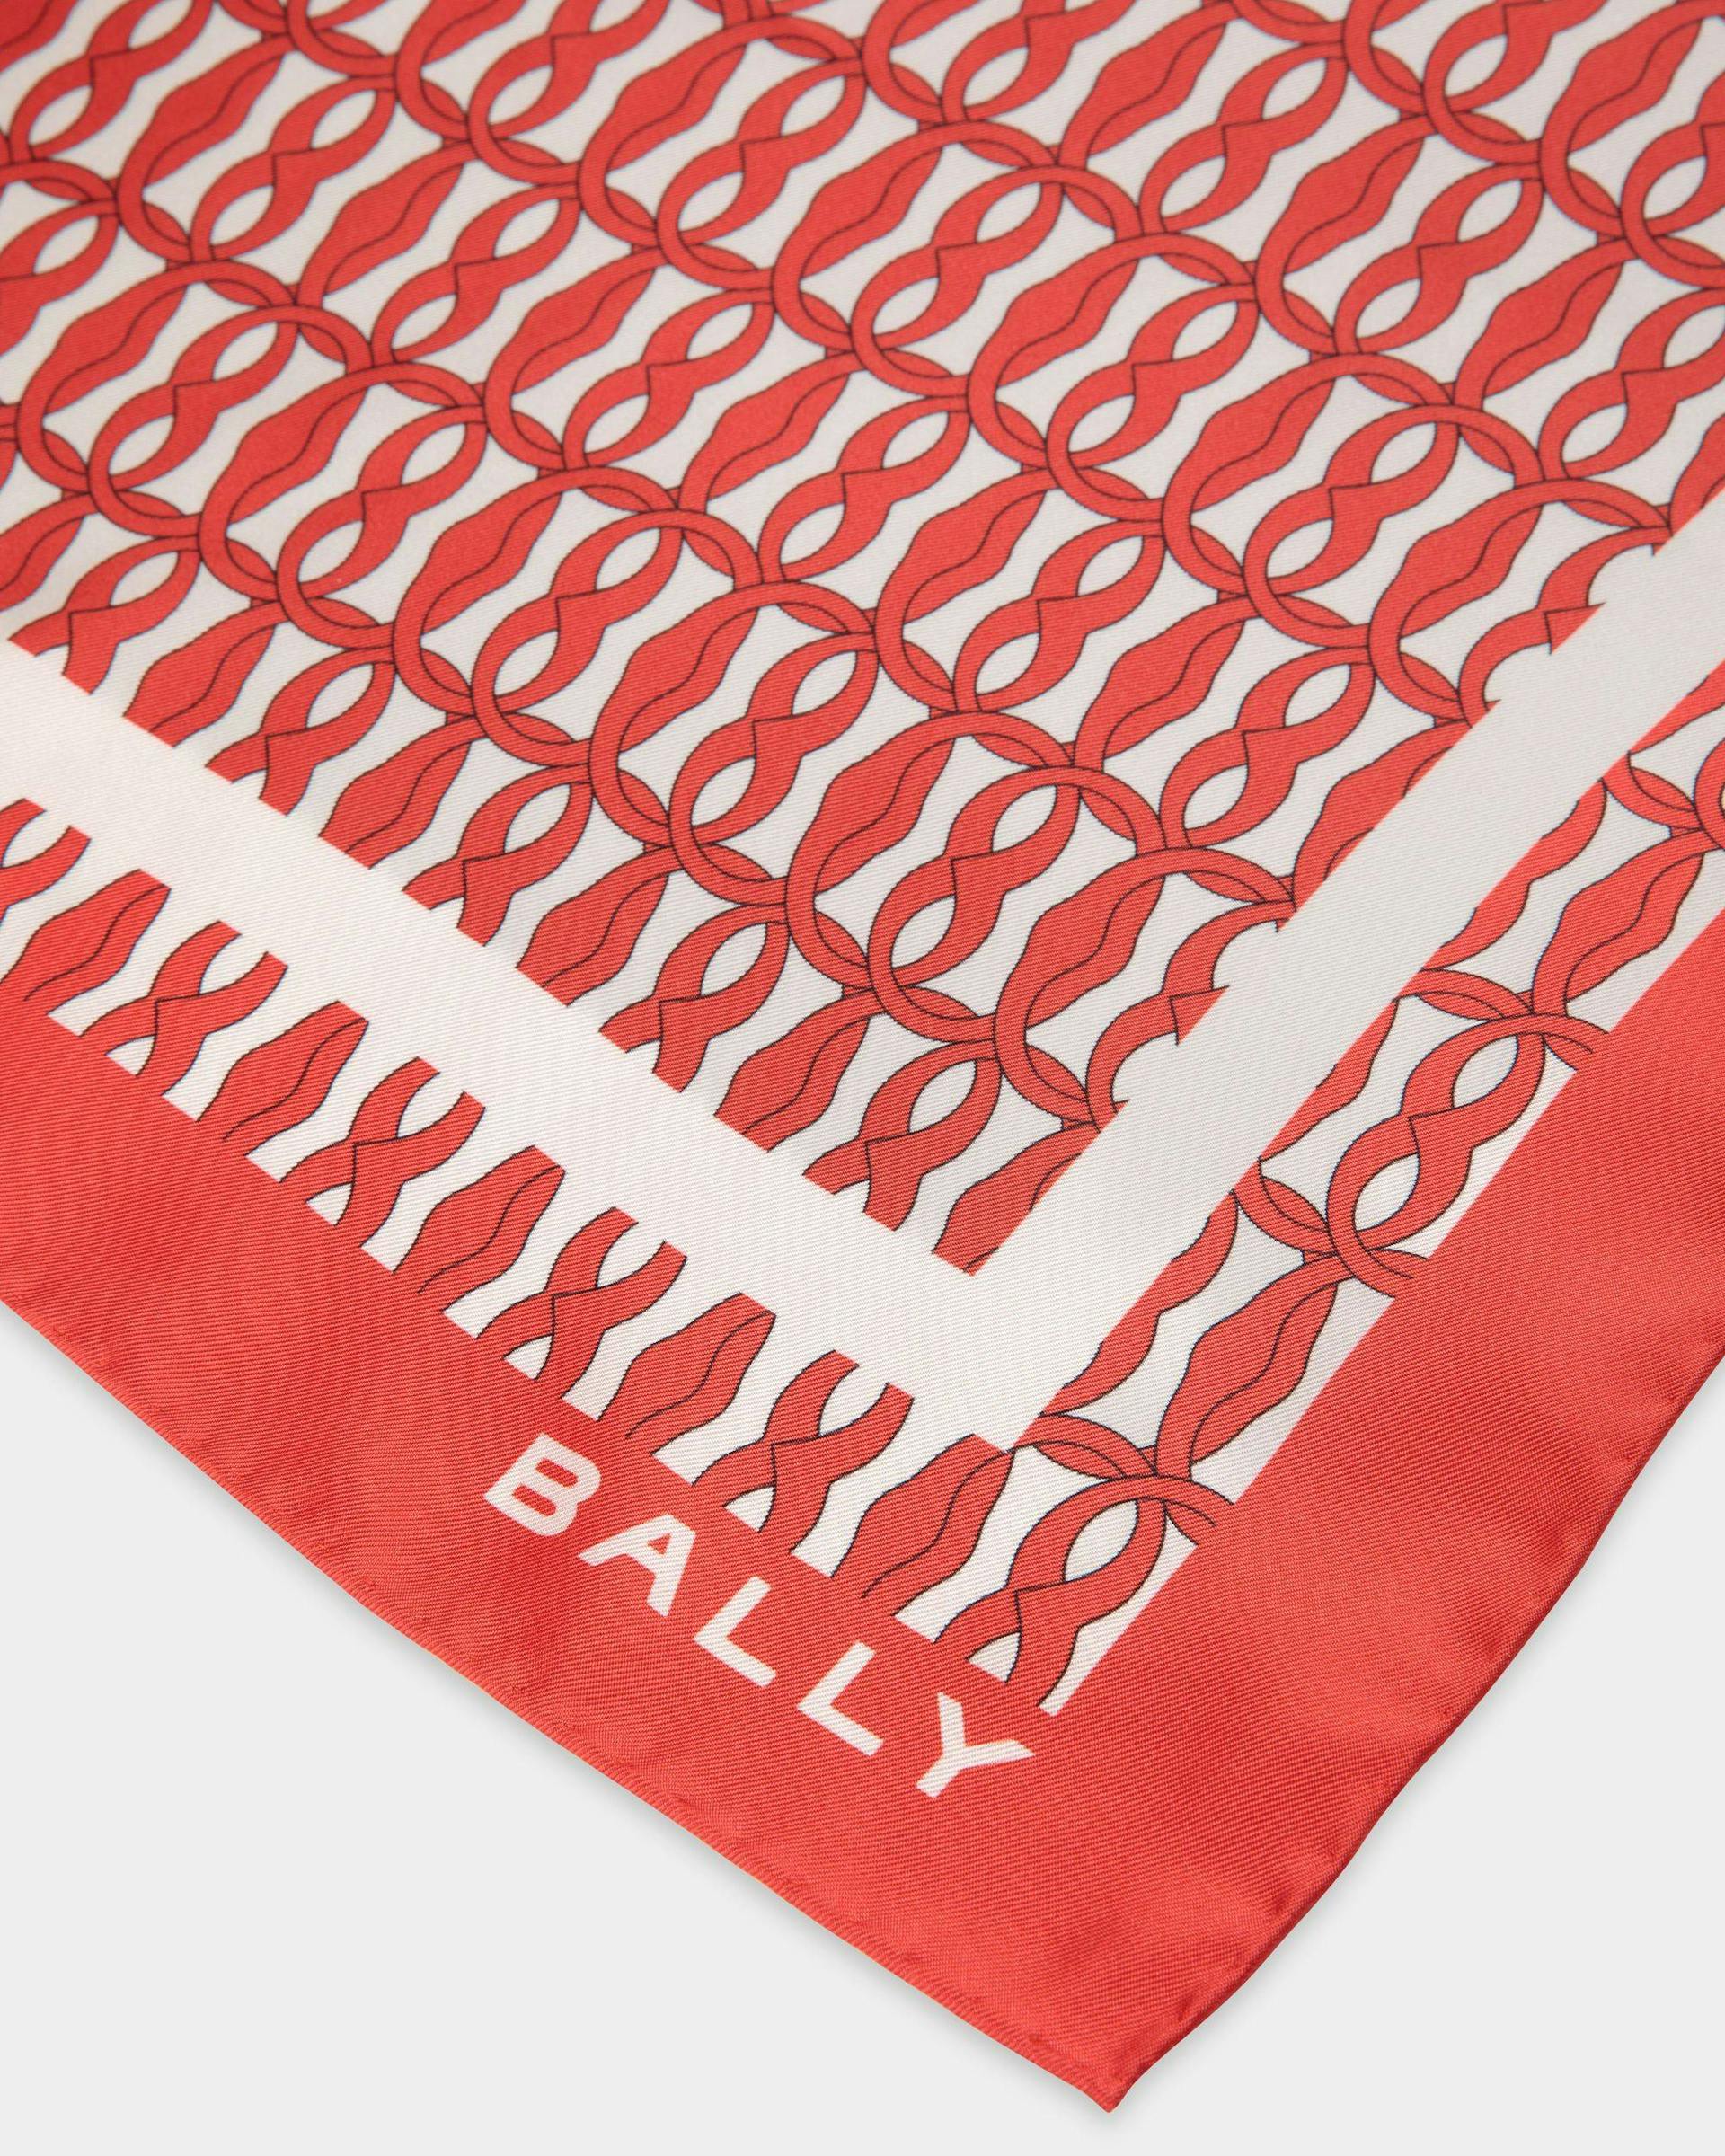 Women's Silk Scarf In Red And White | Bally | Still Life Detail